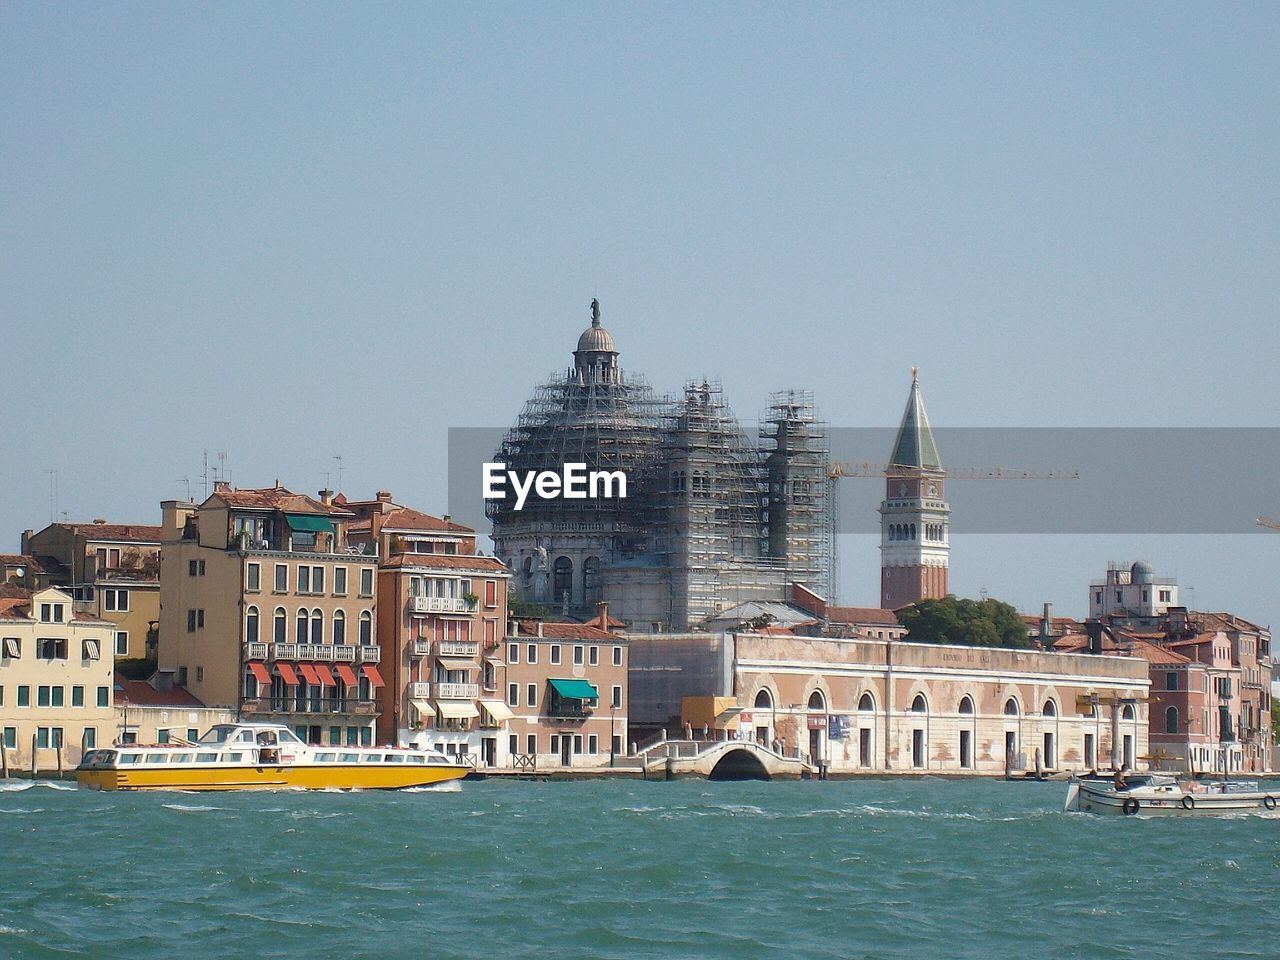 San marco campanile and incomplete santa maria della salute by canal against clear sky